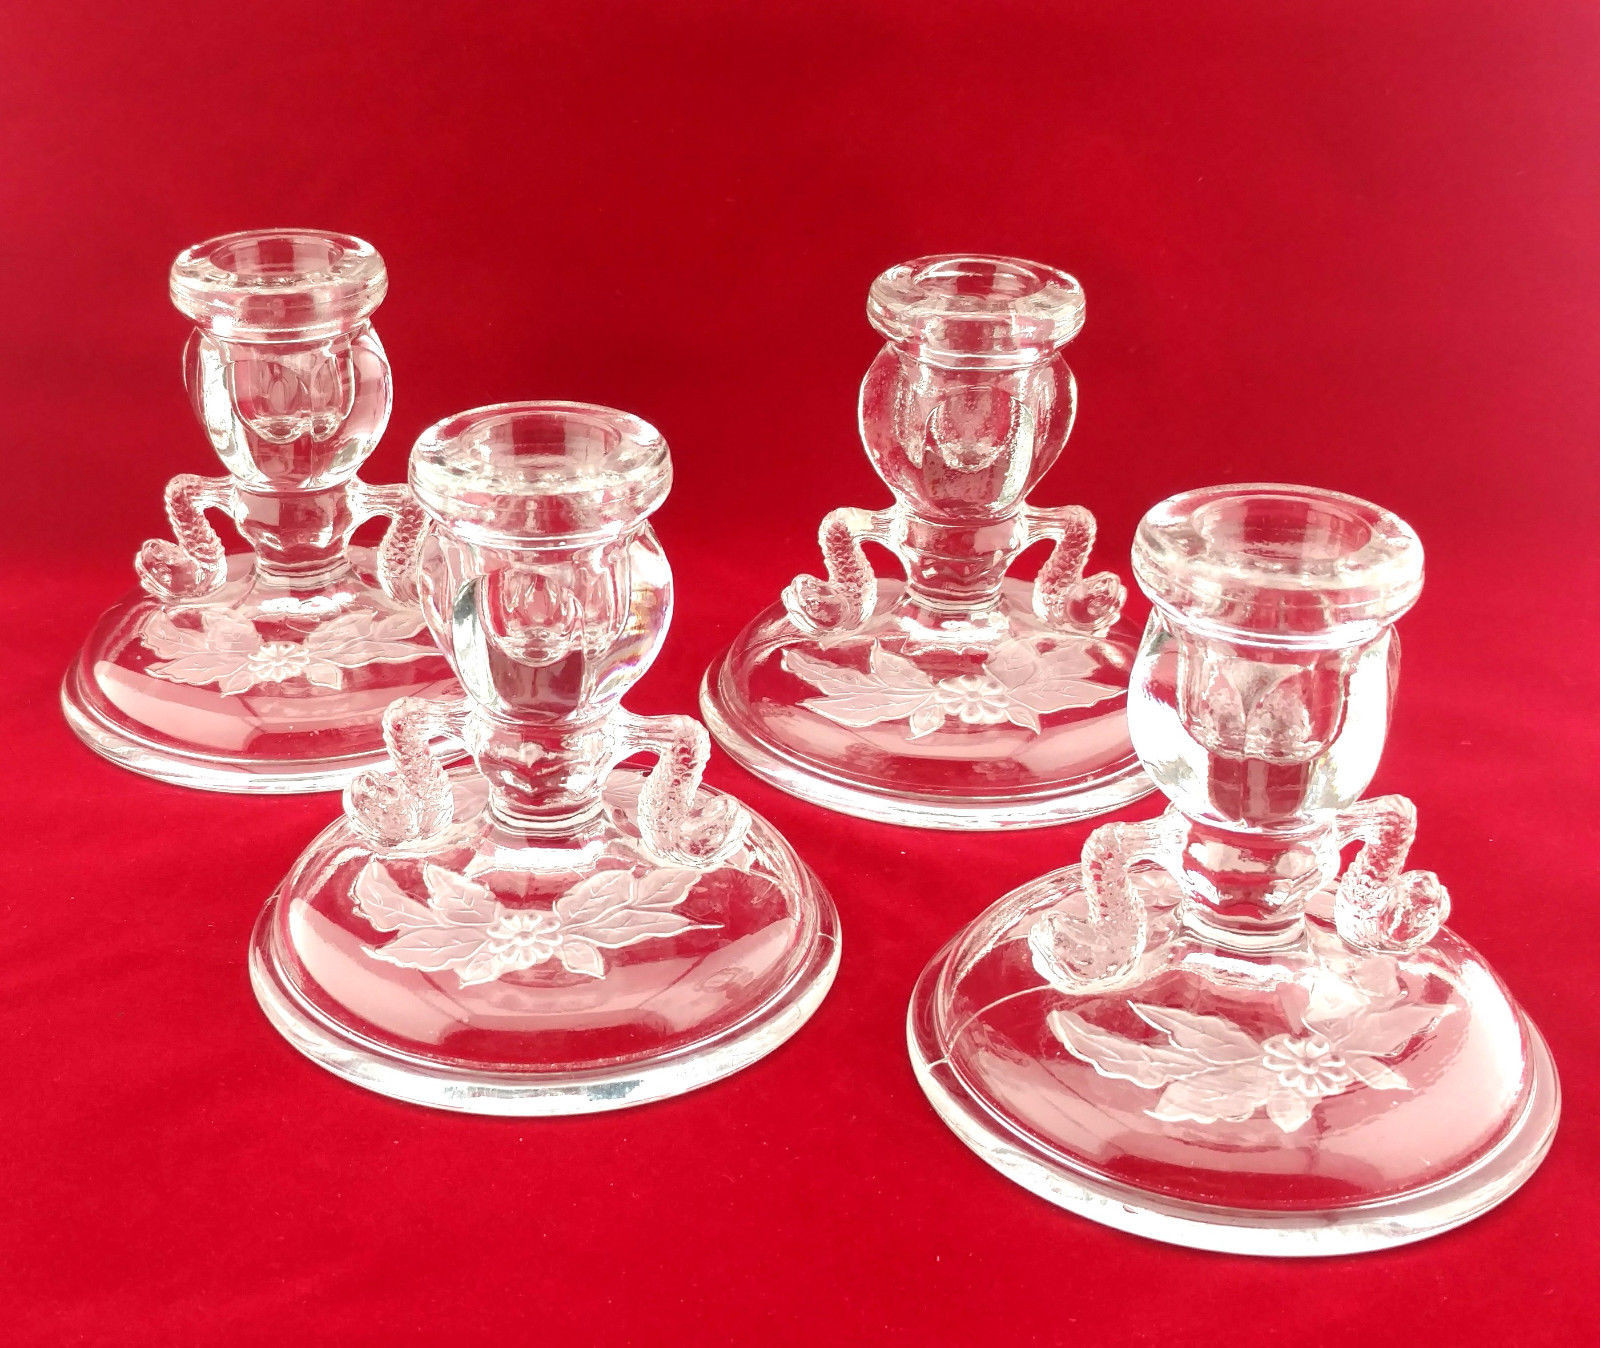 14 Cute Vintage Rose Bowl Vase 2024 free download vintage rose bowl vase of vintage fenton crystal clear dolphin candlestick holders 1927 1937 intended for vintage fenton crystal clear dolphin candlestick holders 1927 1937 set of 4 1 of 8on